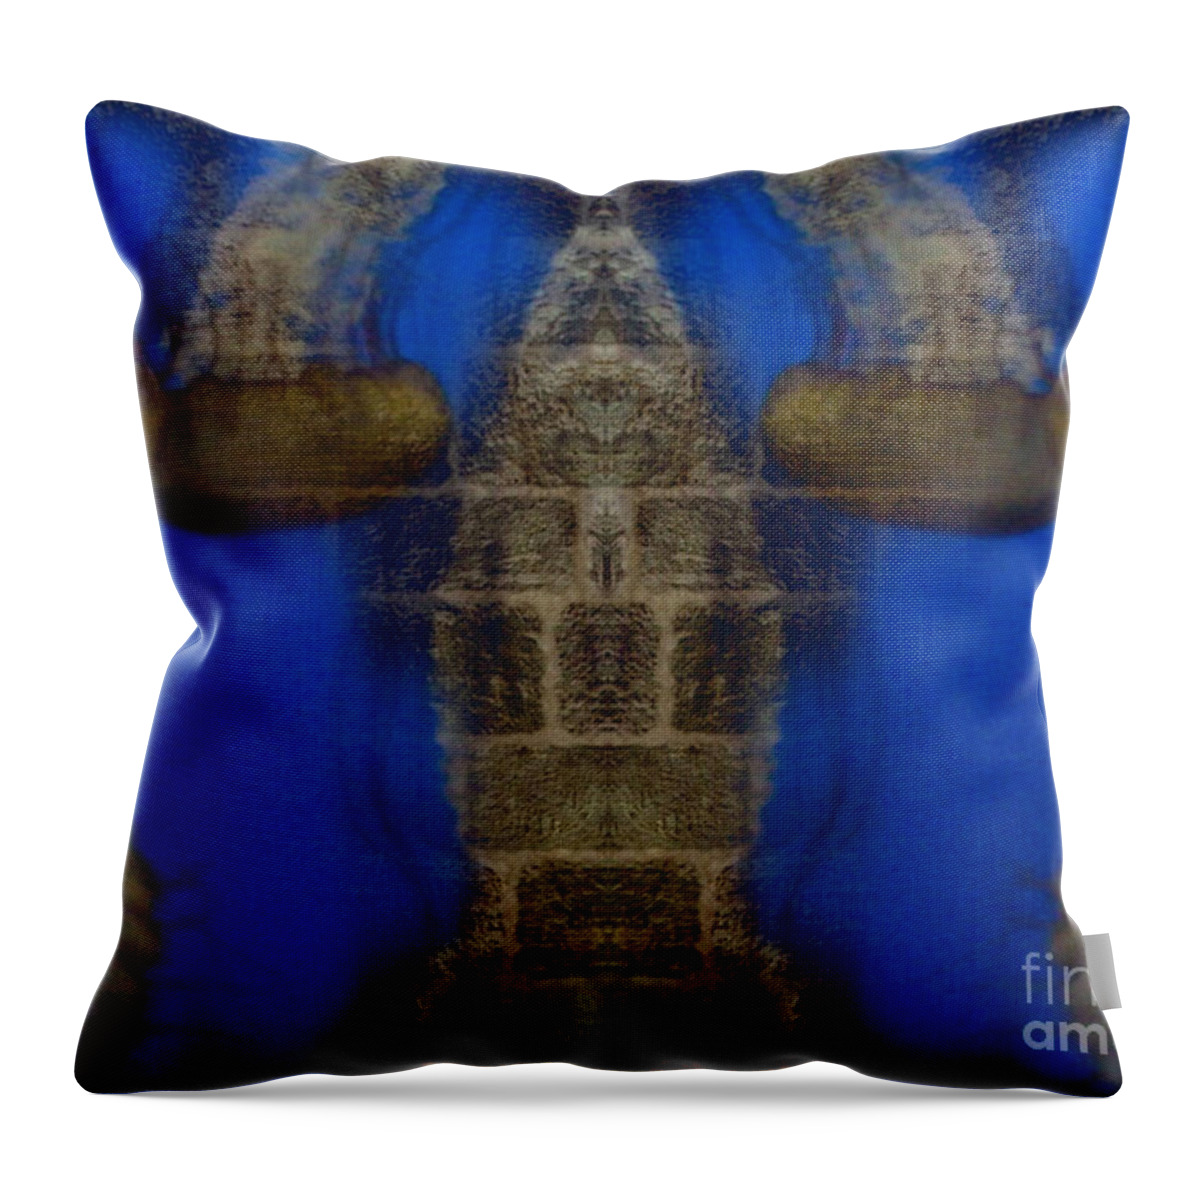 Jelly Fish Throw Pillow featuring the digital art Jelly Fish 2 by Rindi Rehs